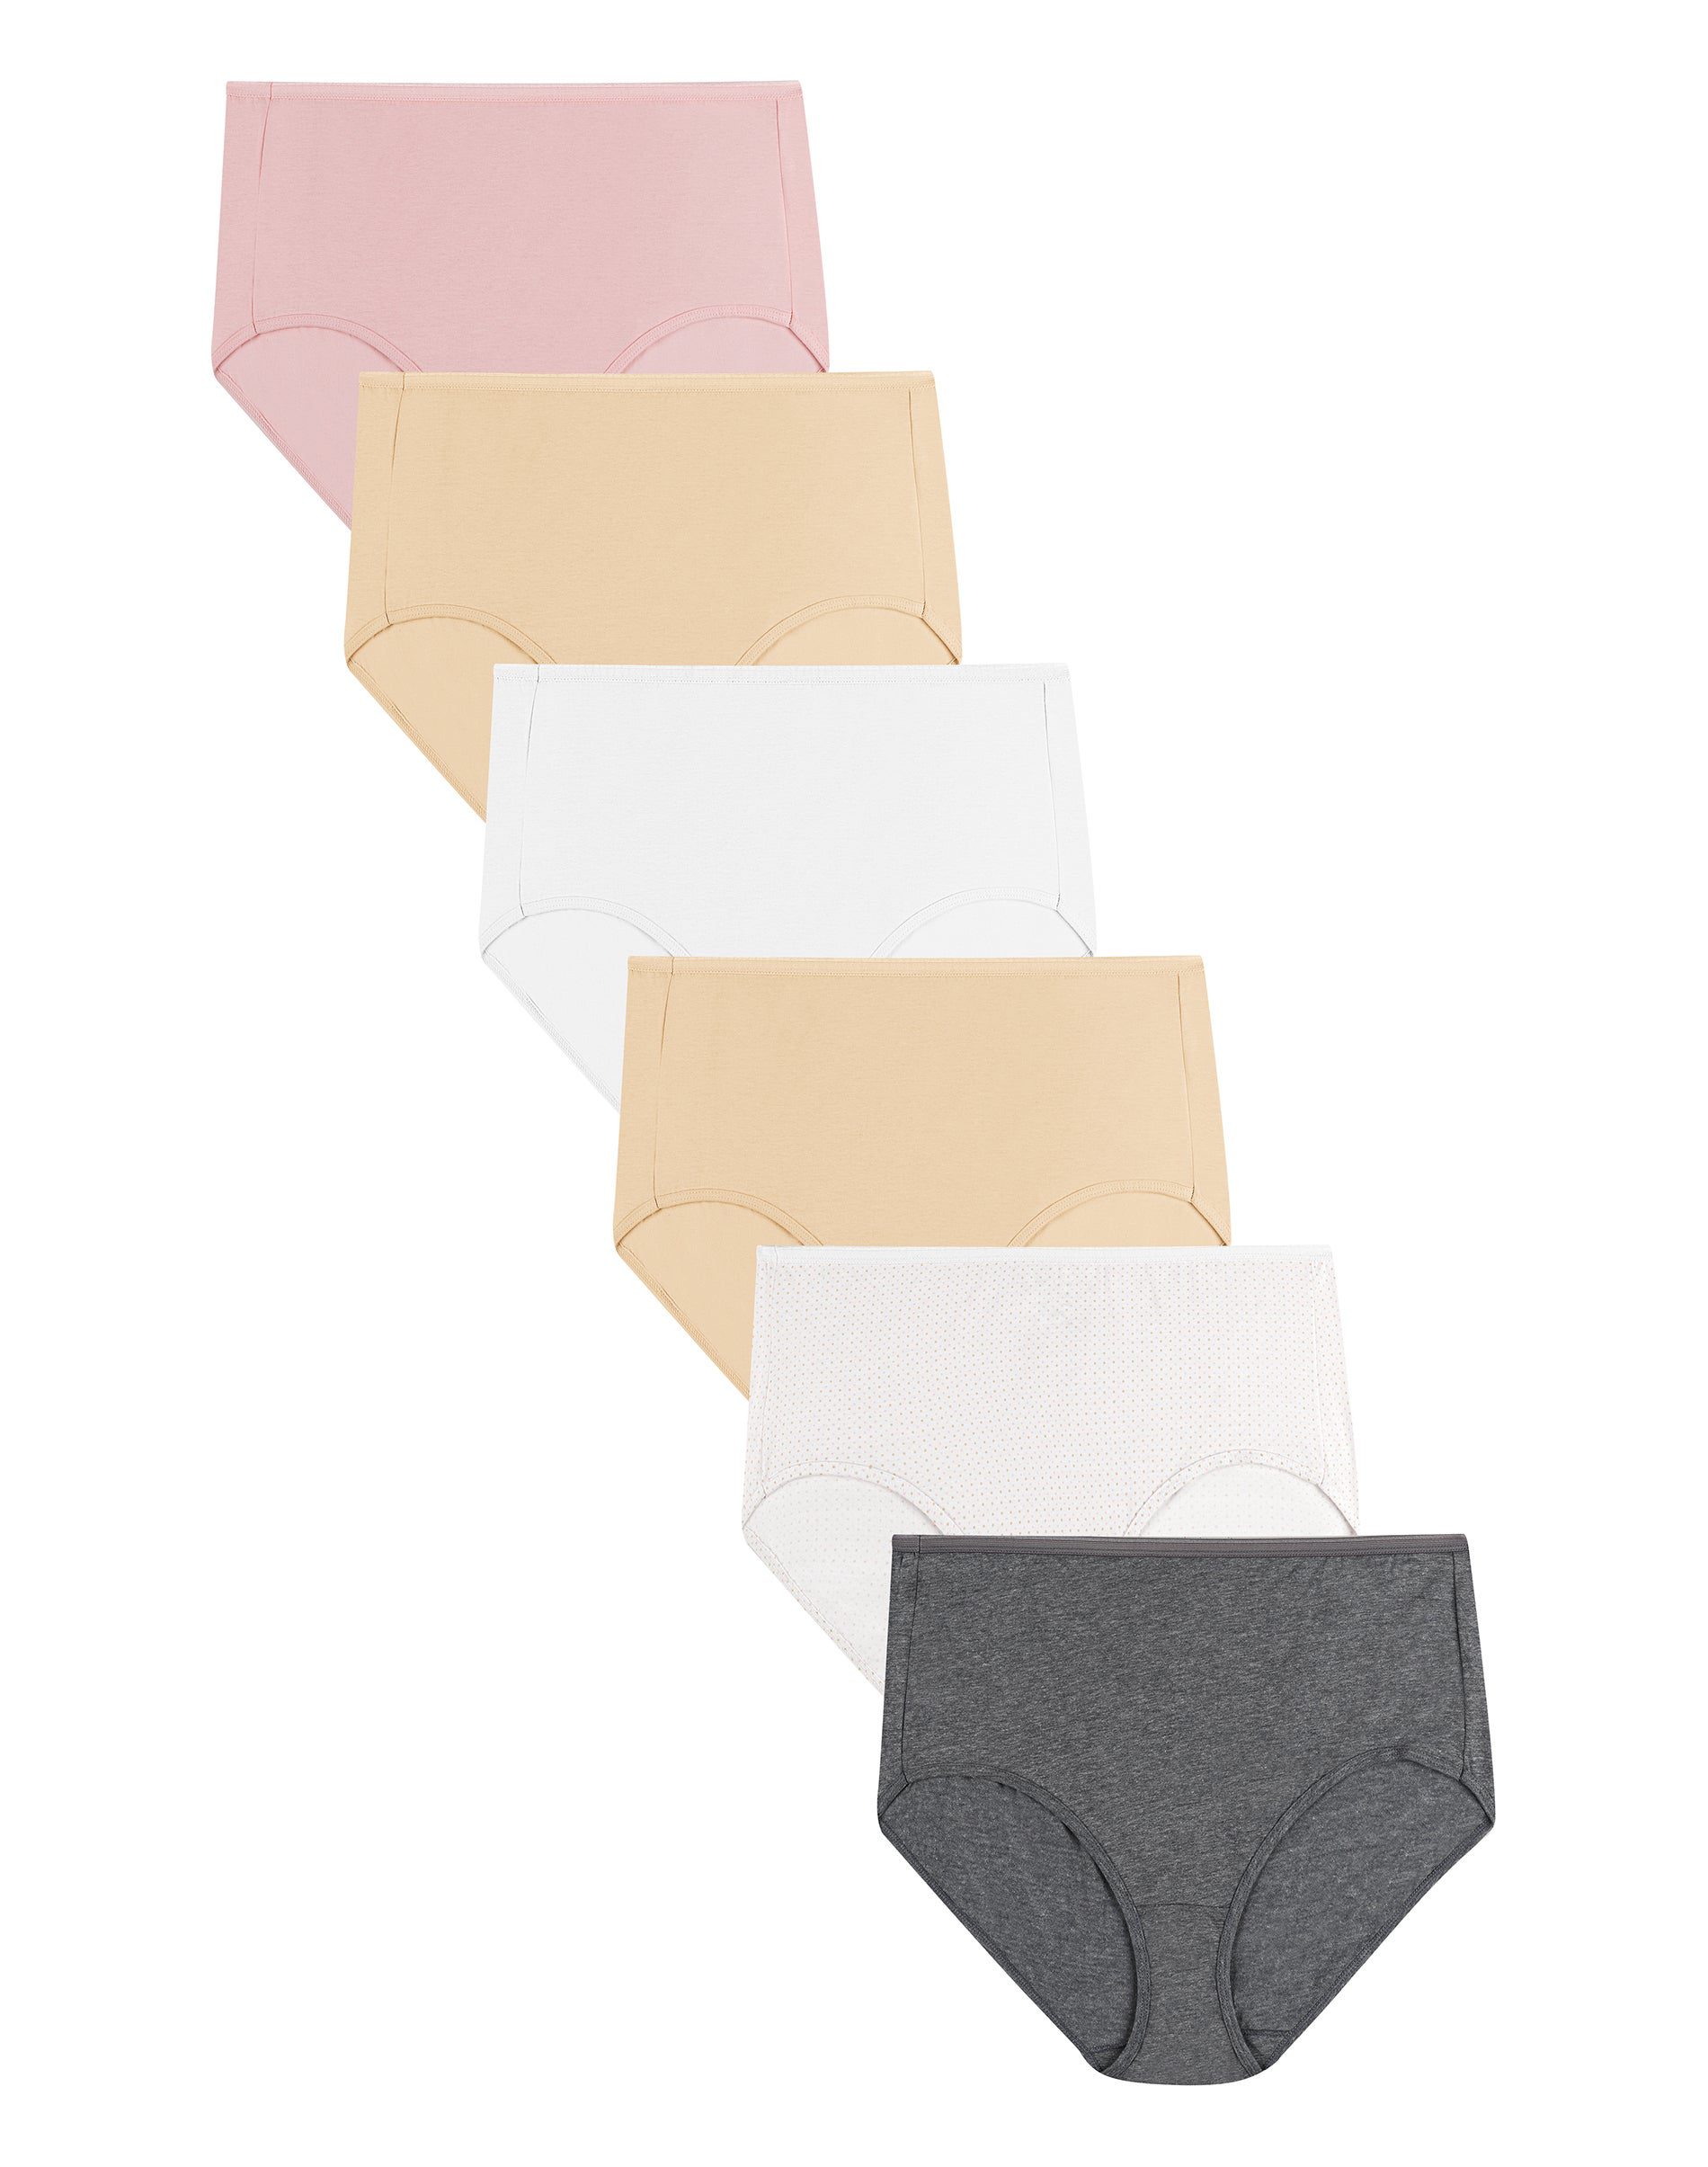 JMS by Hanes Womens Cotton High Briefs Assorted, 6-Pack - Apparel Direct  Distributor